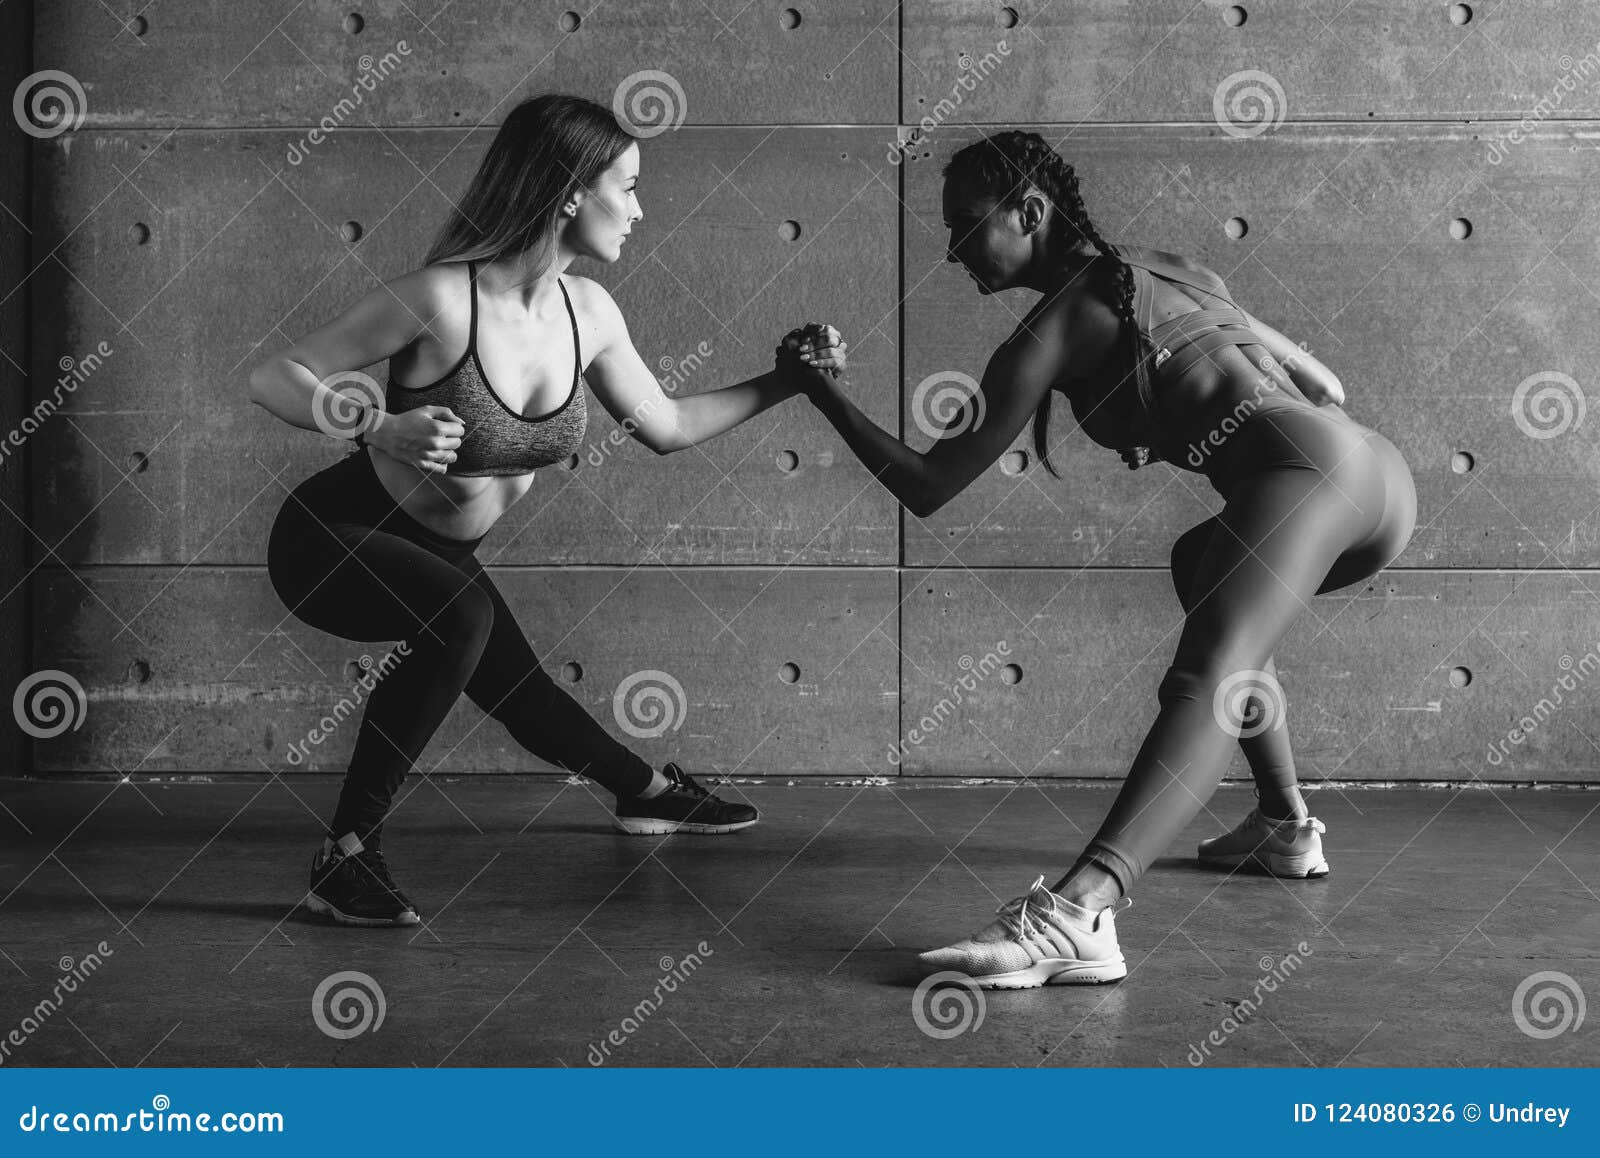 fit woman wrestle on hands with a female opponent looking in her eyes.